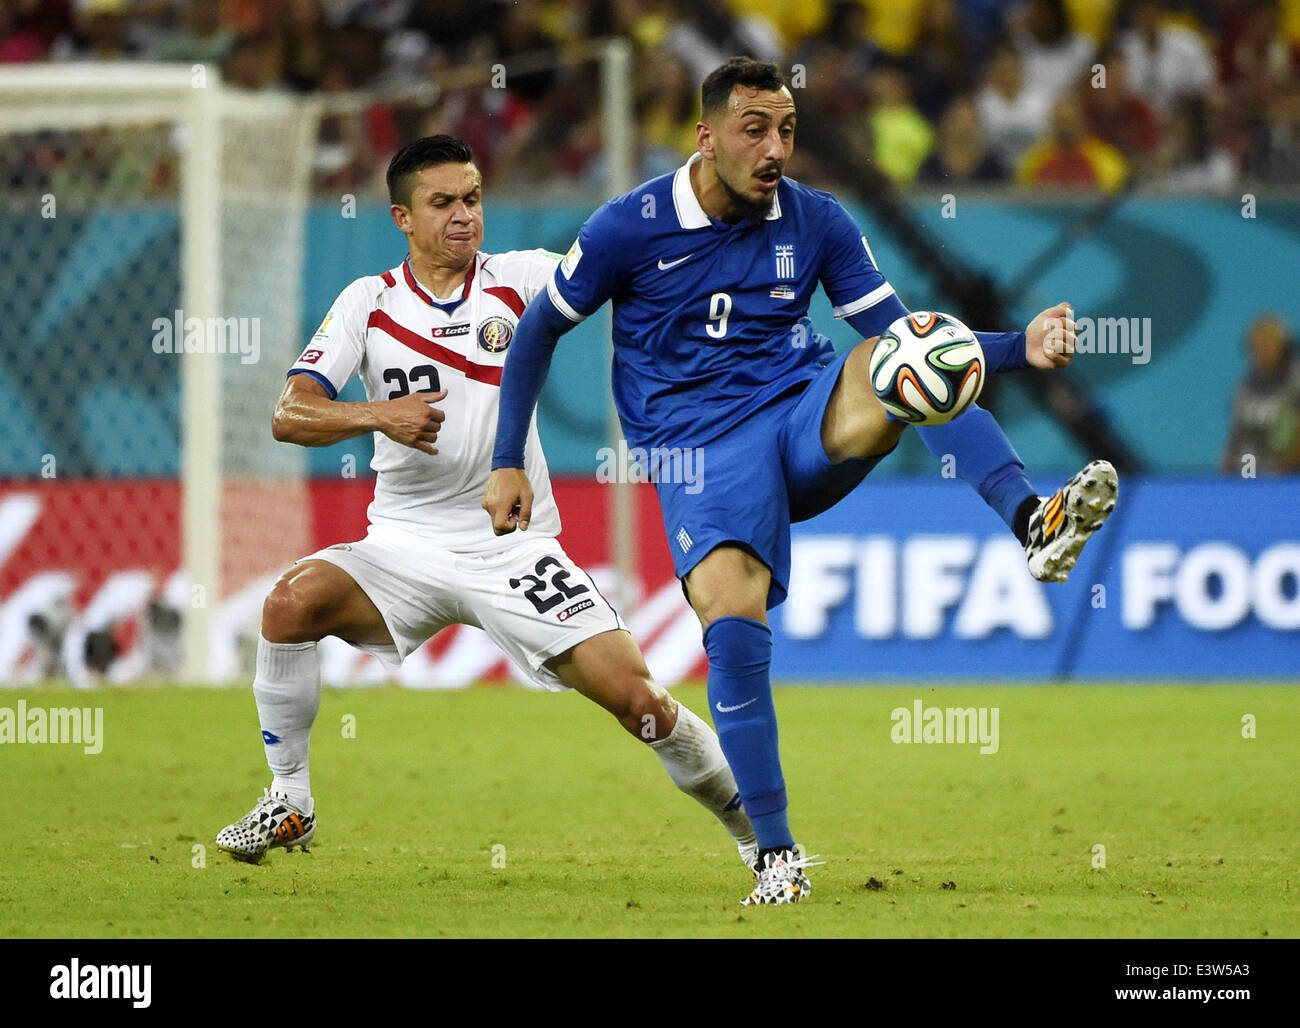 Recife, Brazil. 29th June, 2014. Greece's Konstantinos Mitroglou (R) vies with Costa Rica's Jose Miguel Cubero during a Round of 16 match between Costa Rica and Greece of 2014 FIFA World Cup at the Arena Pernambuco Stadium in Recife, Brazil, on June 29, 2014. Credit:  Lui Siu Wai/Xinhua/Alamy Live News Stock Photo